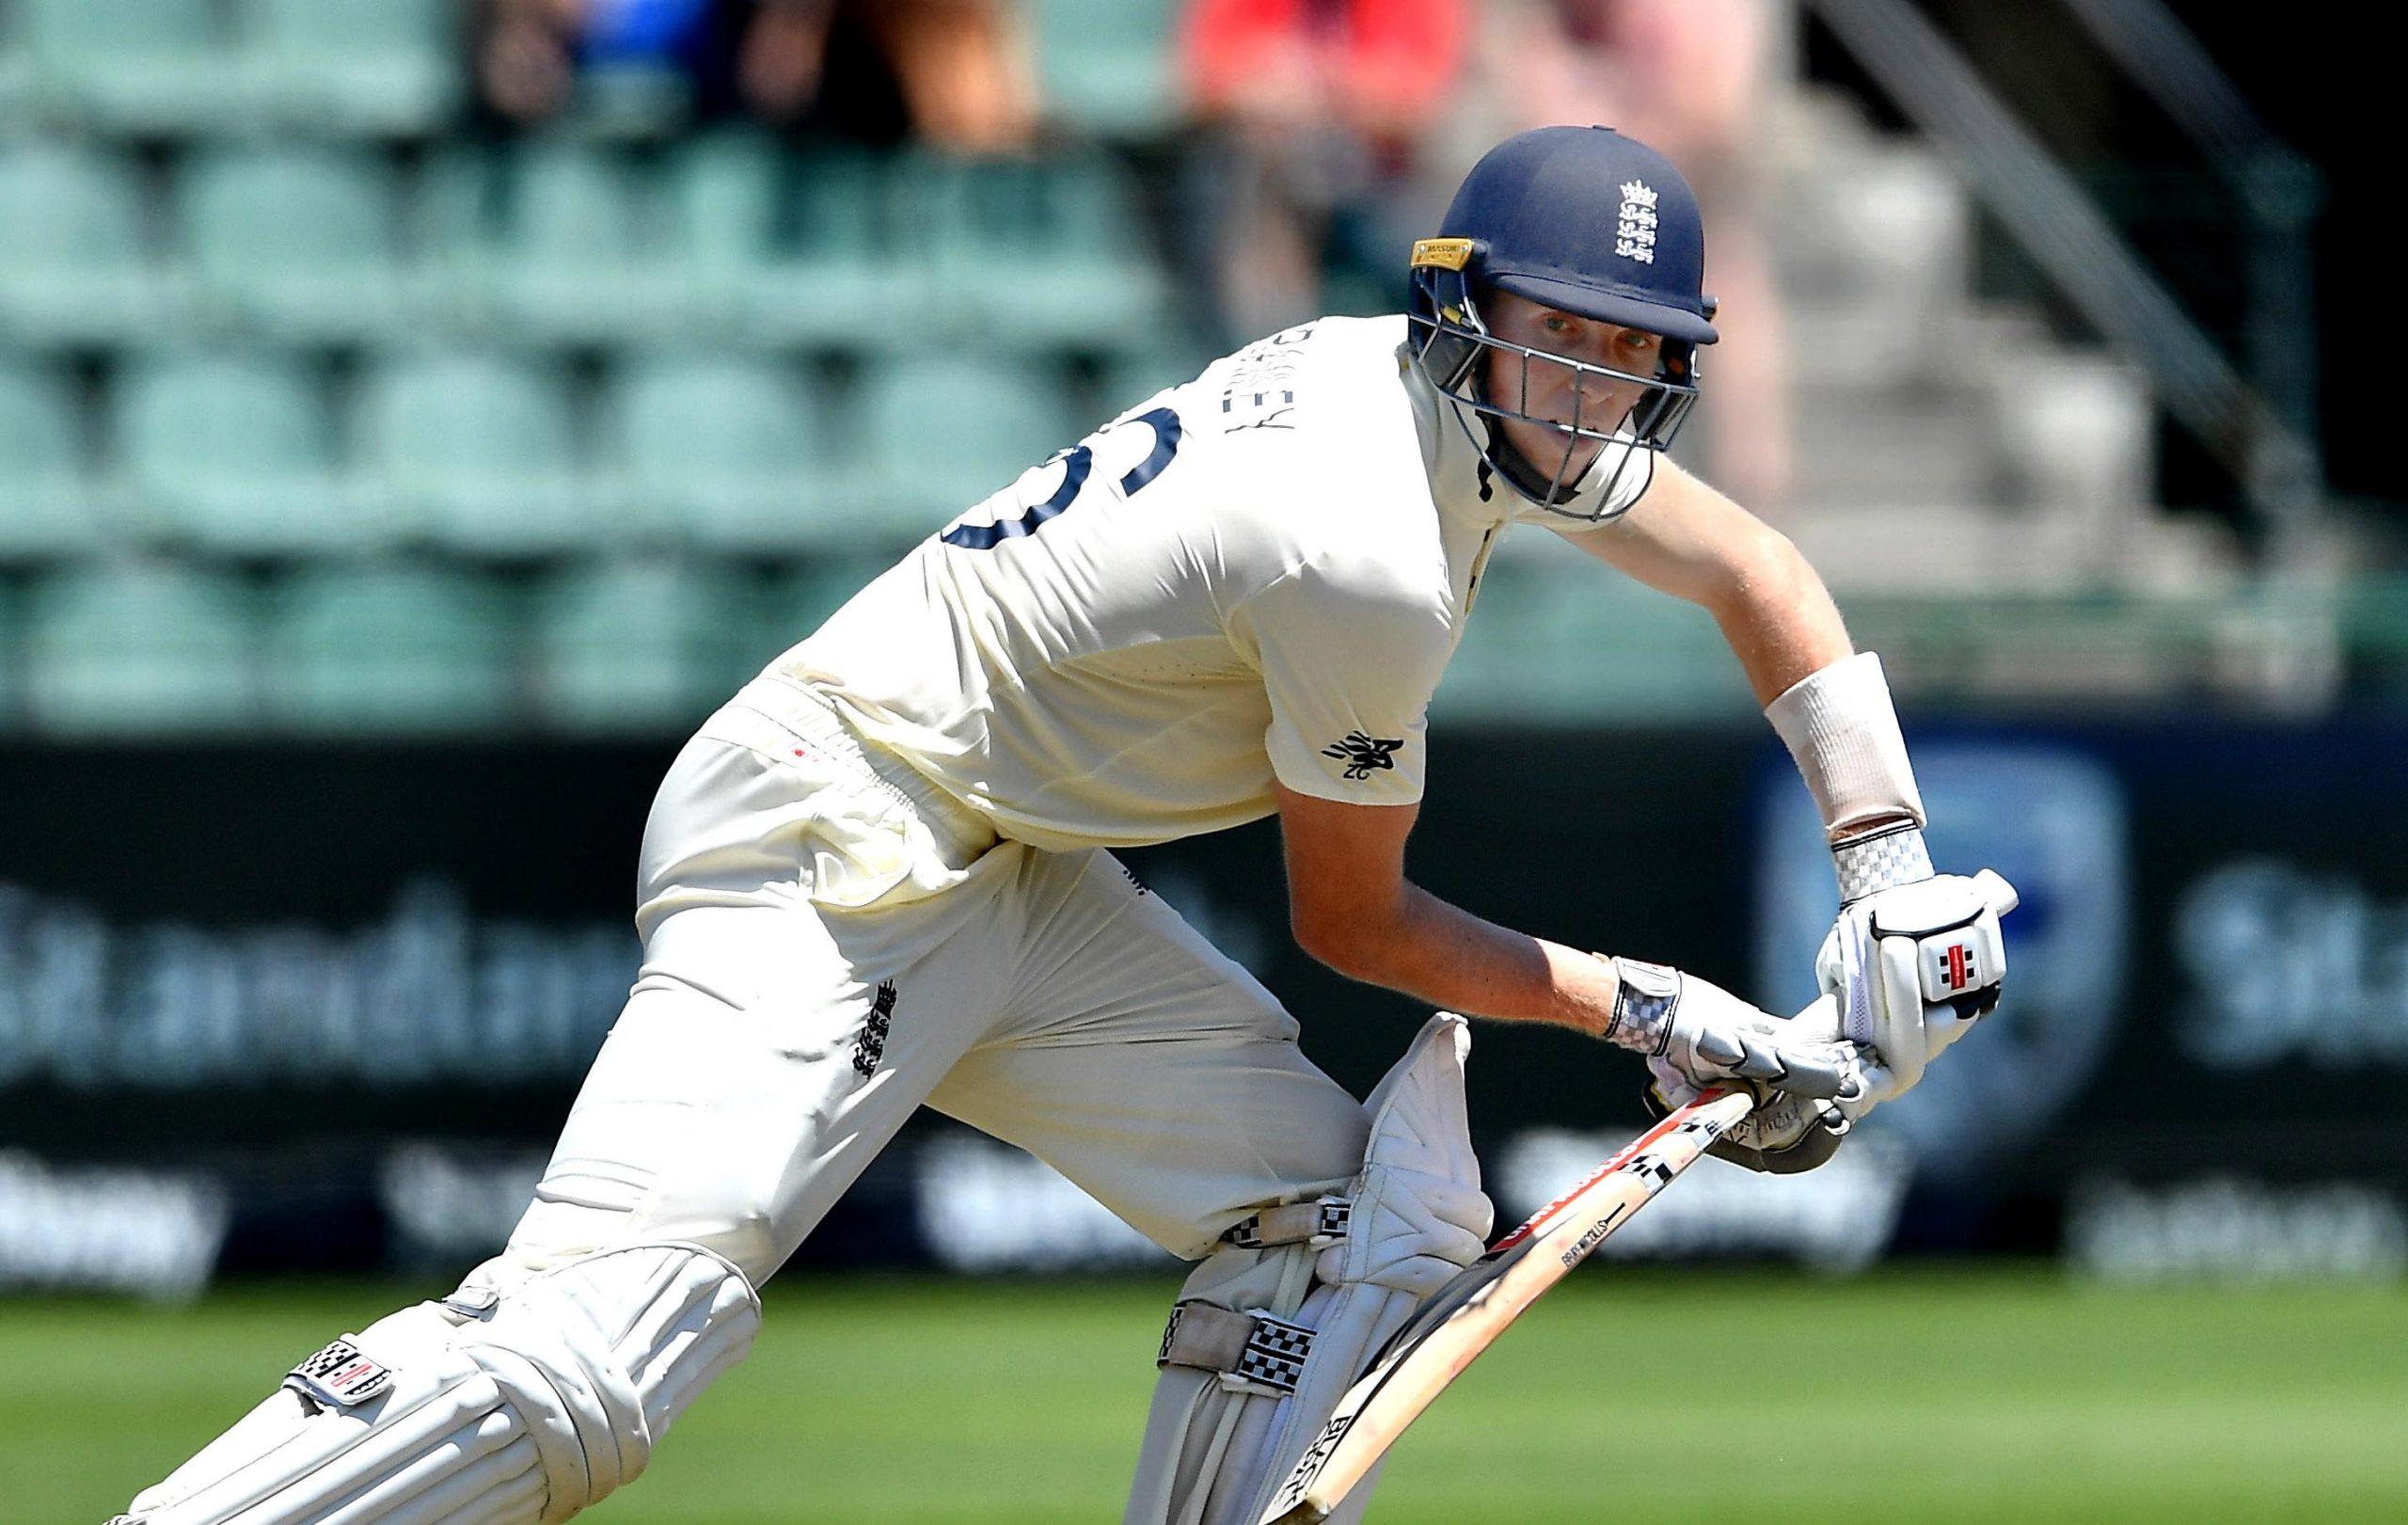 Zak Crawley Set To Make Ashes Debut As England Look To Reshuffle The Playing XI